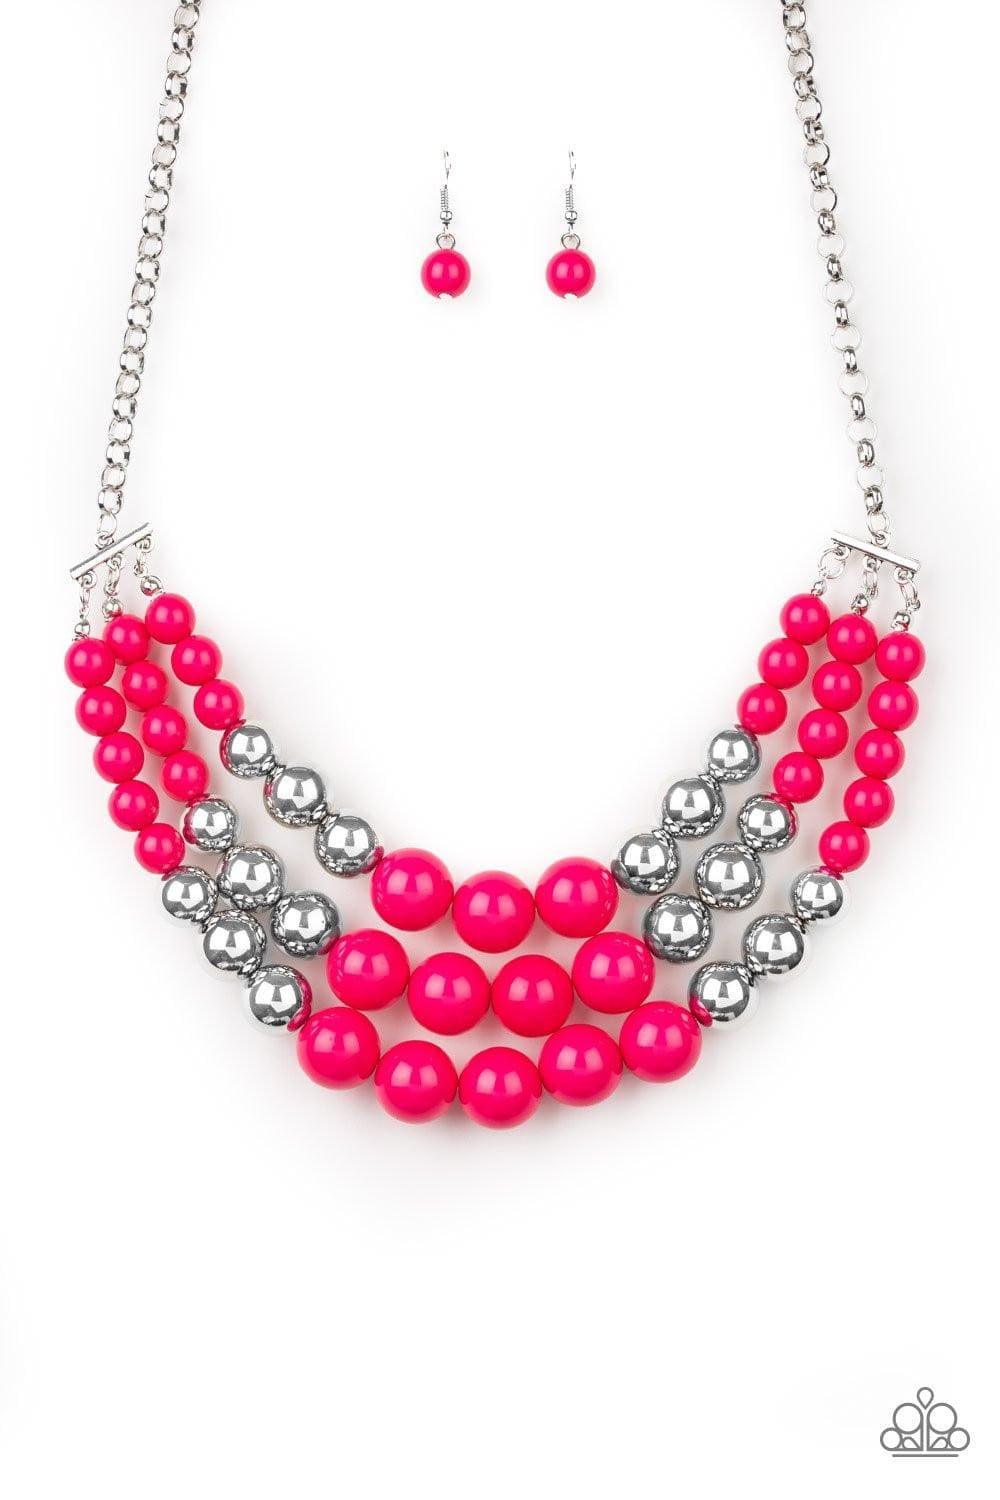 Paparazzi Accessories - Dream Pop - Pink Necklace - Bling by JessieK